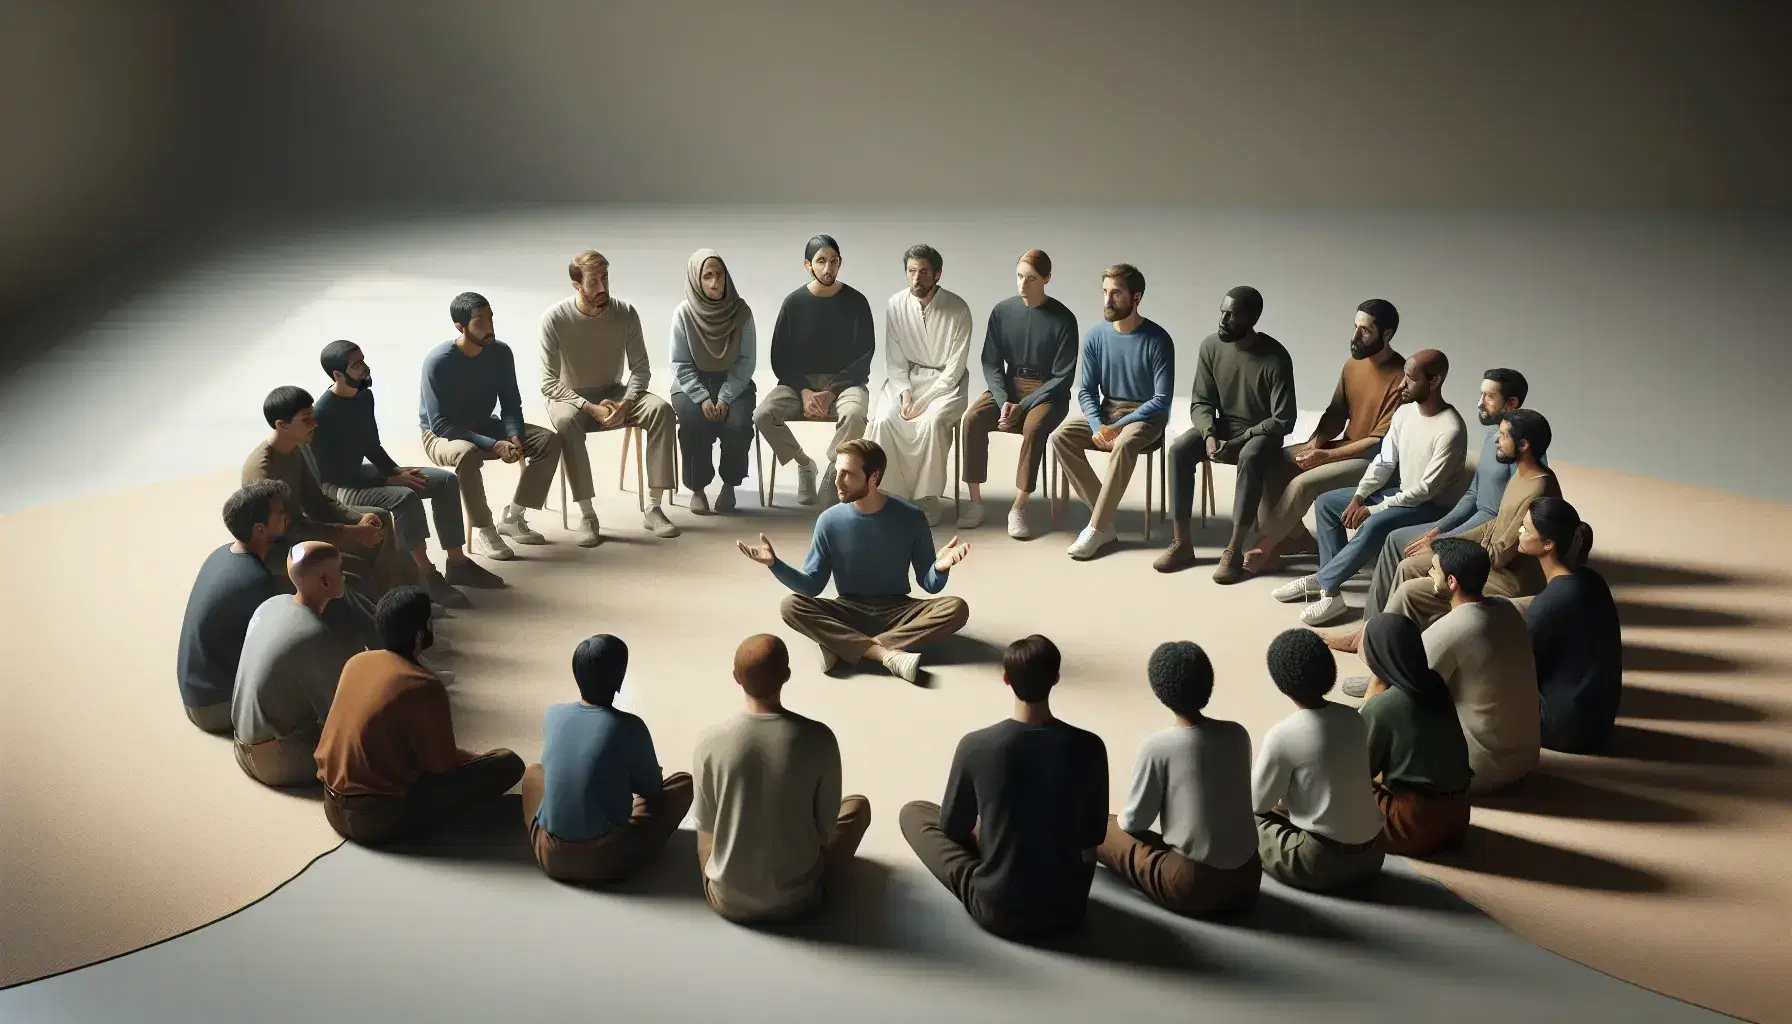 Multi-ethnic group sitting in a semicircle with a person in the center gesturing while speaking, in a neutral environment with soft lighting.